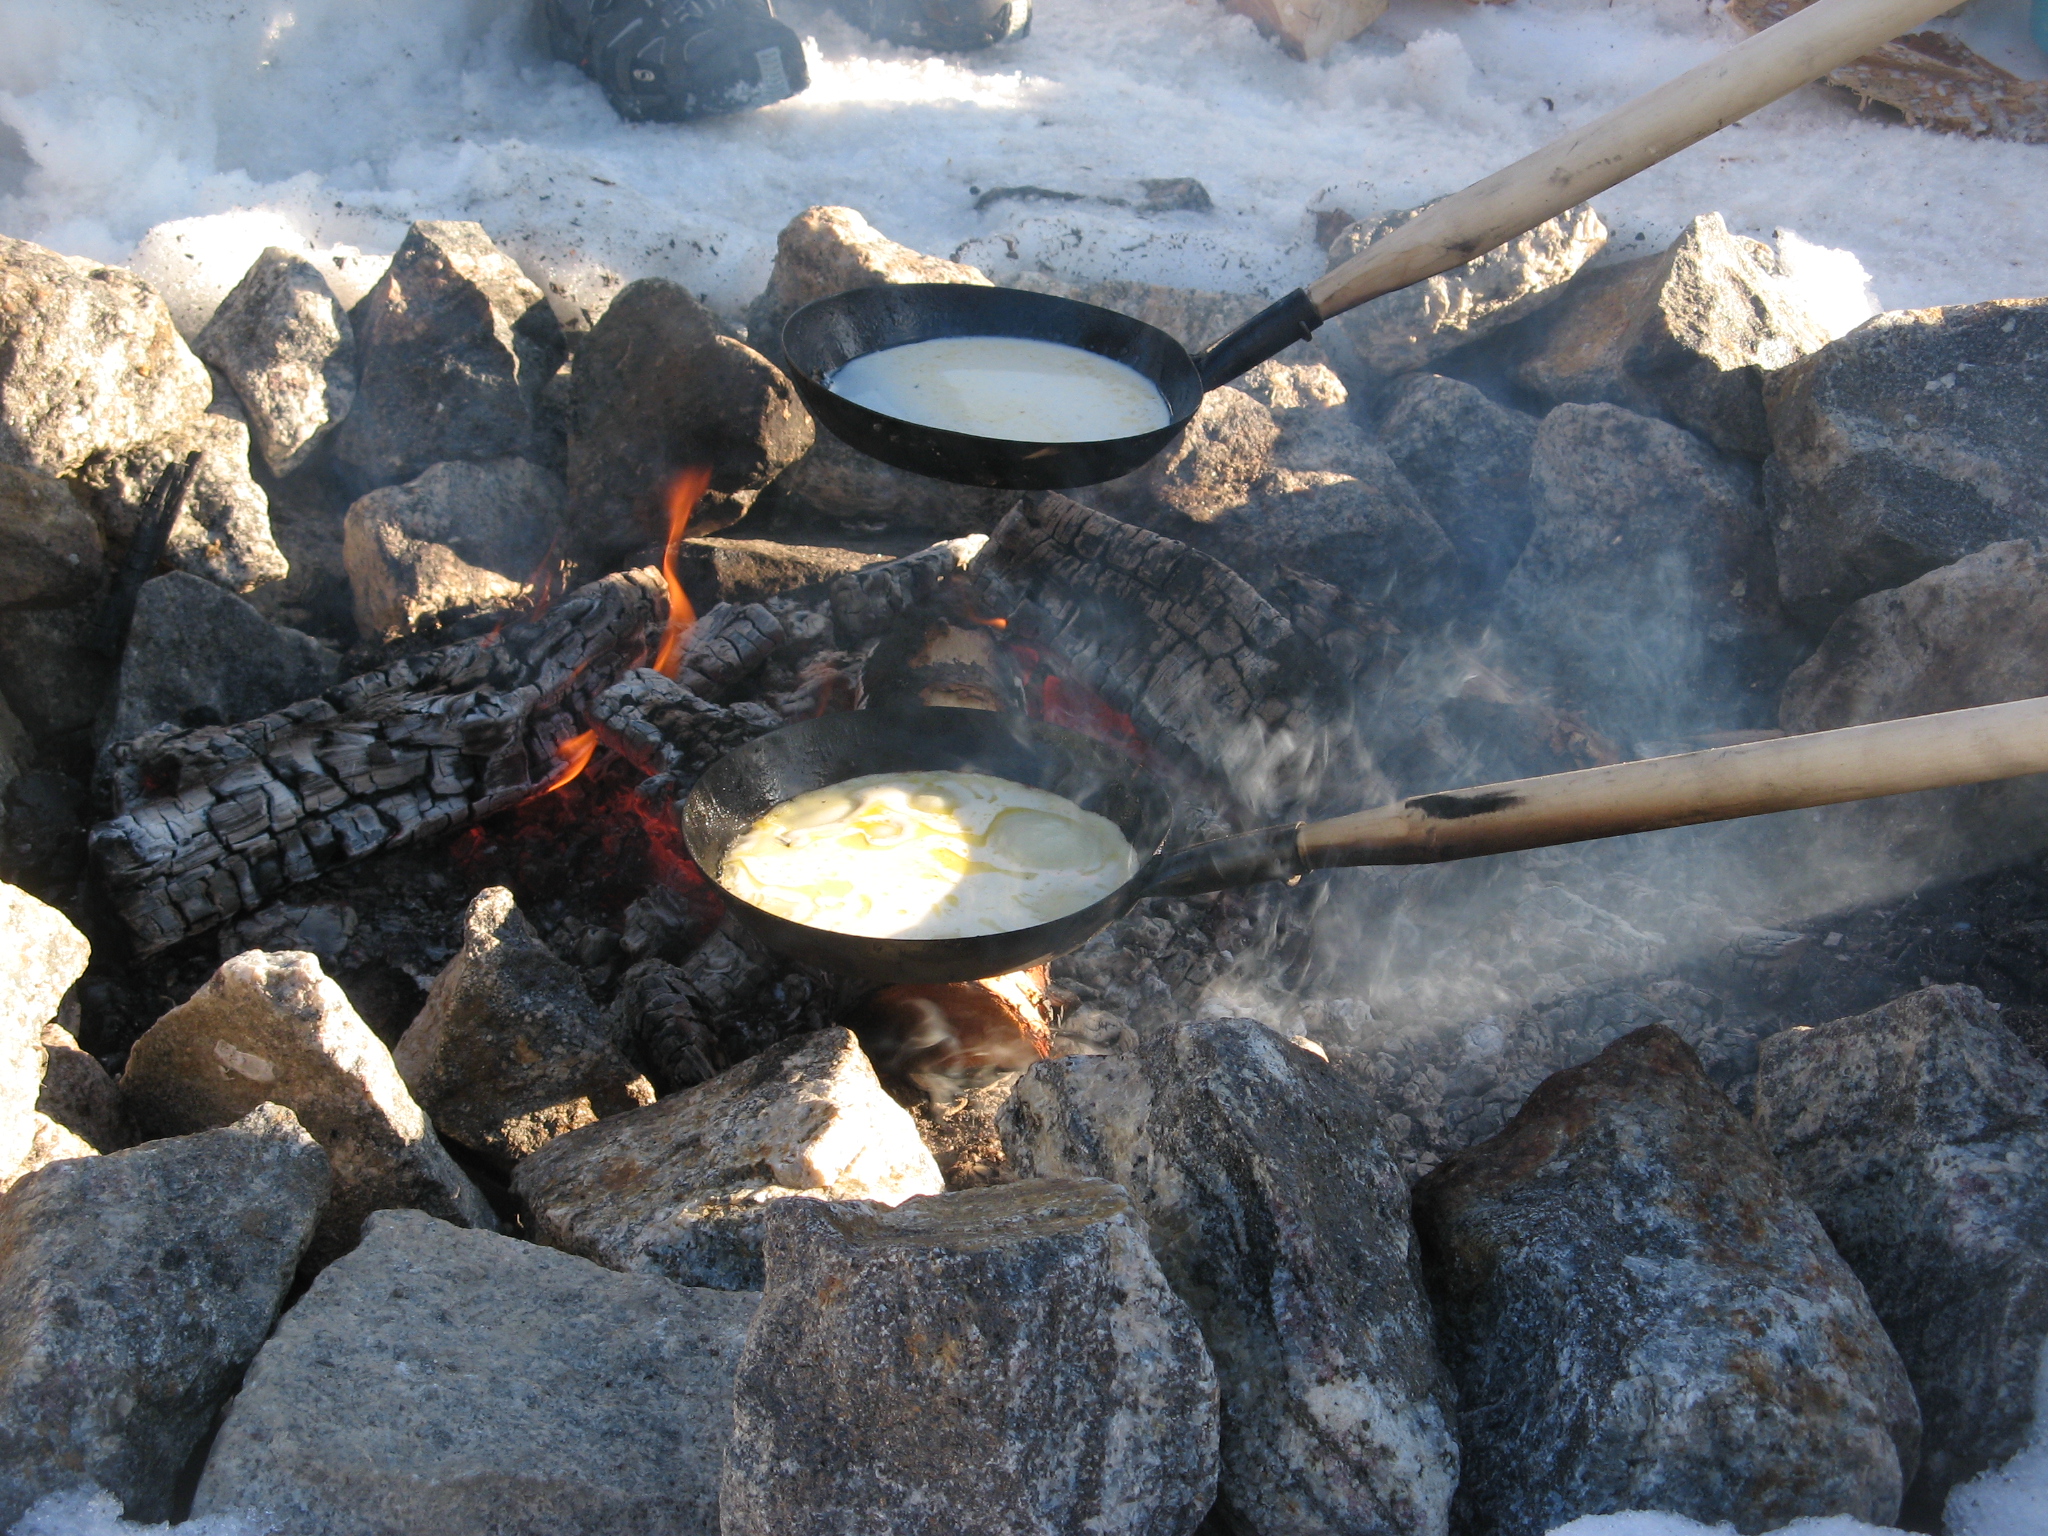 Pancakes outdoors Finland in winter